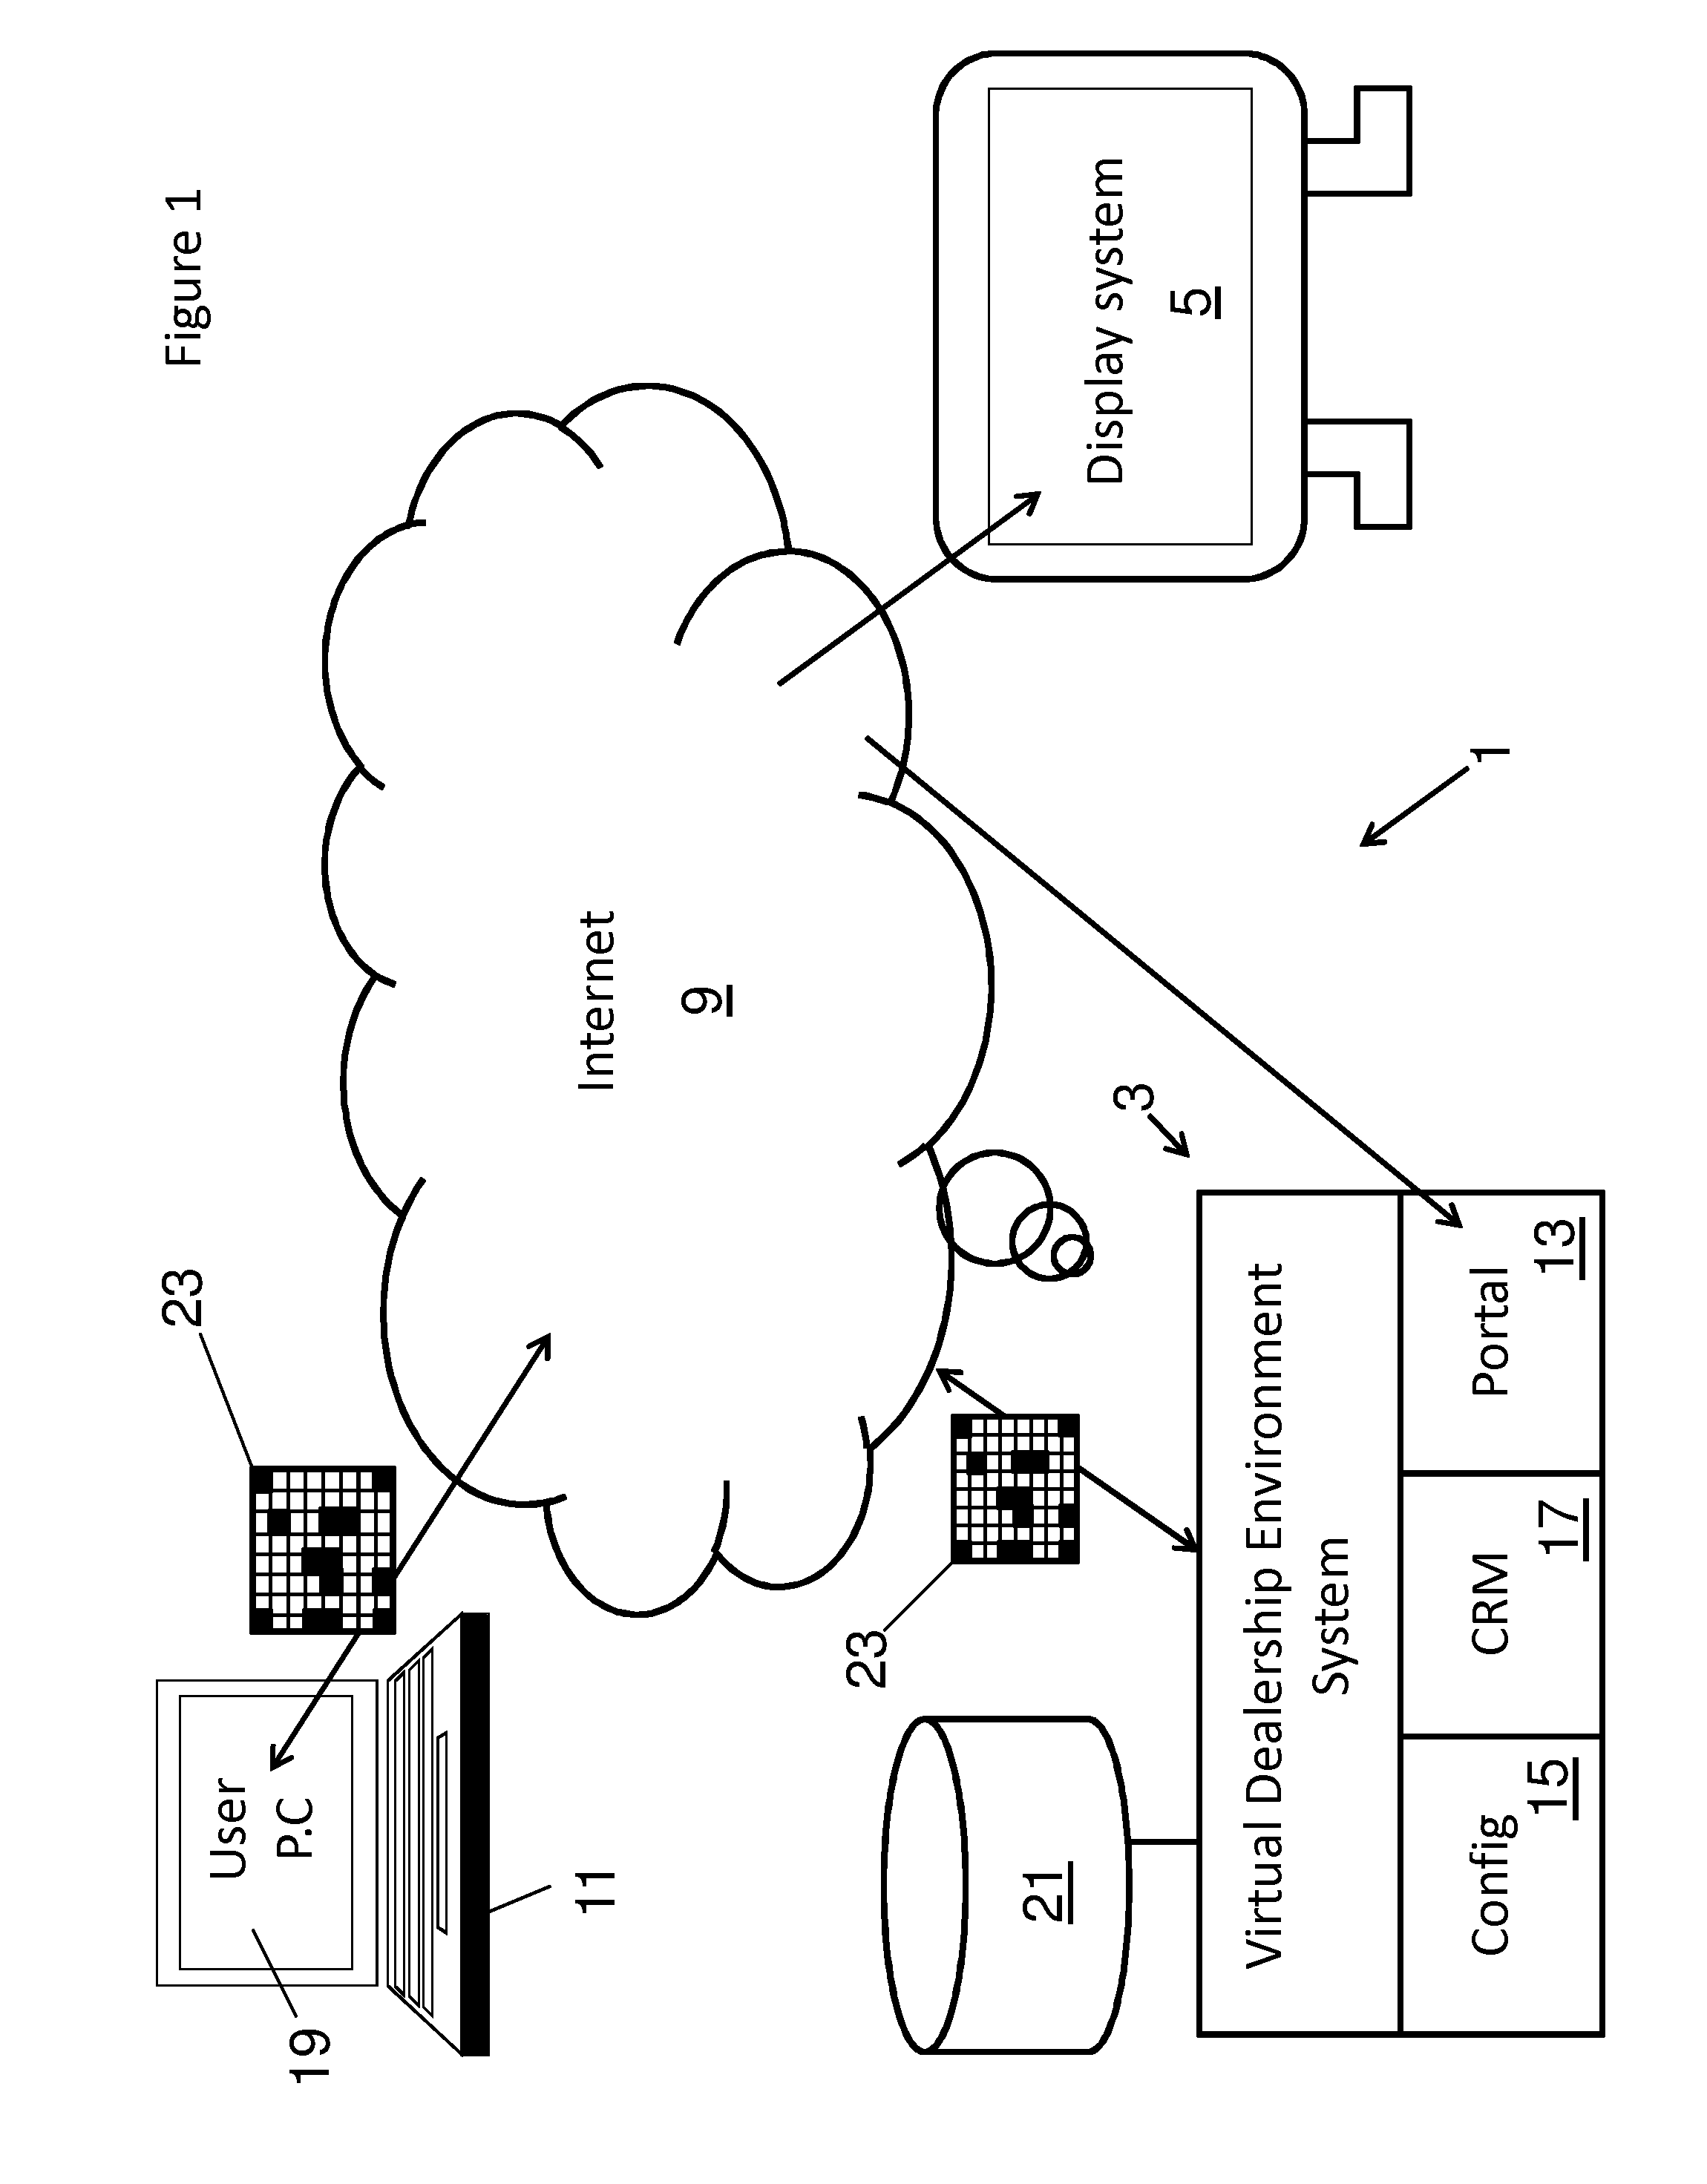 Method of interacting with a simulated object